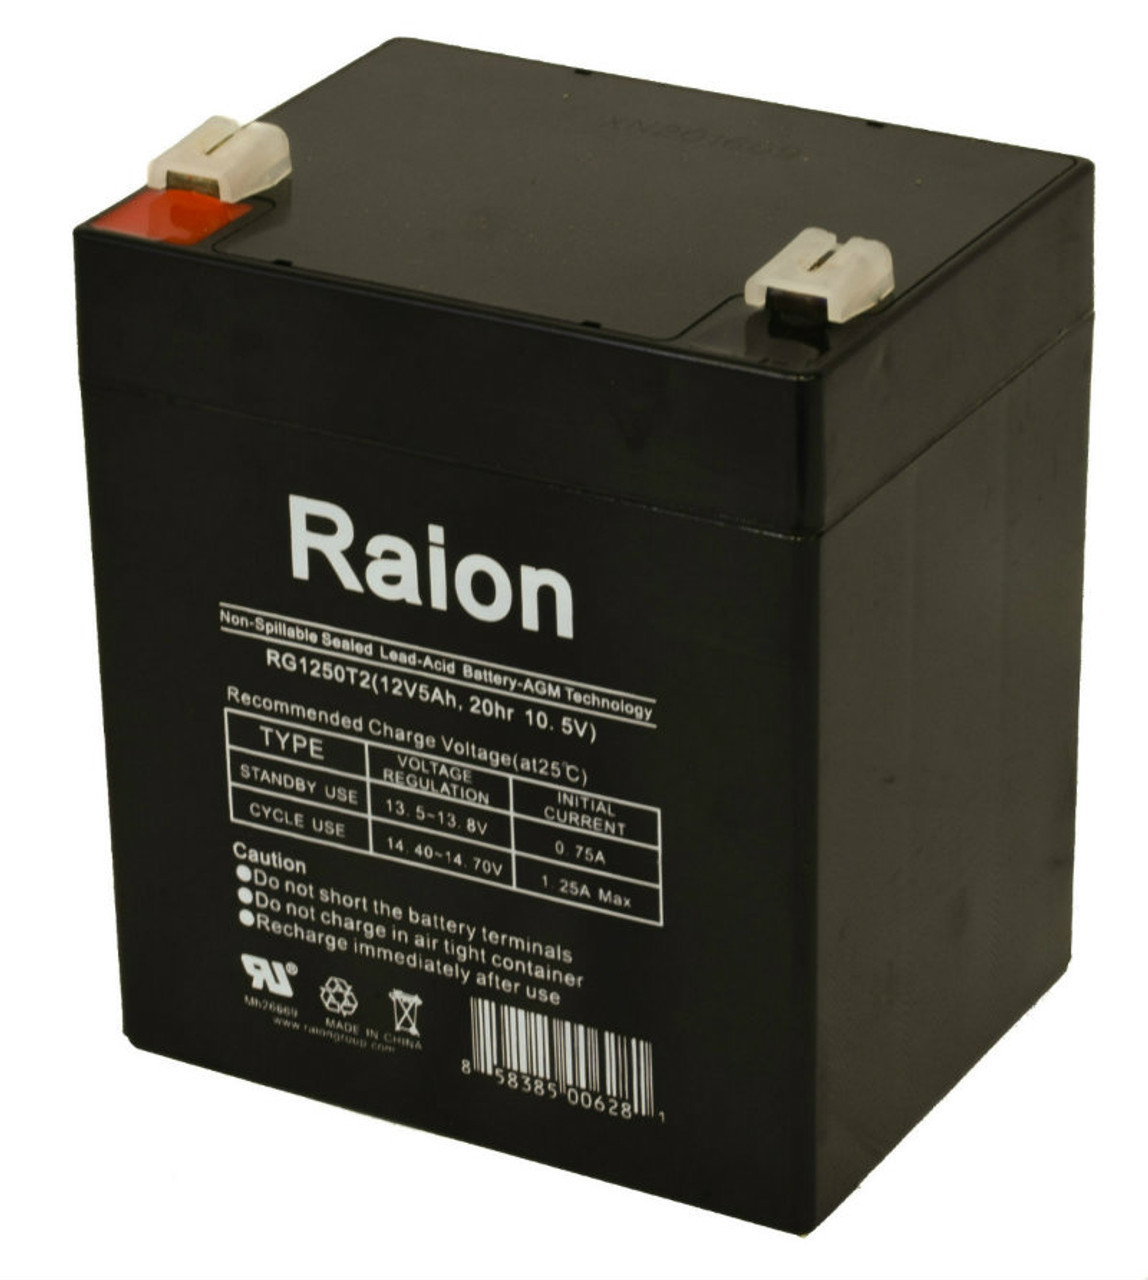 Raion Power 12V 5Ah Replacement Fire Alarm Control Panel Battery for Innovonics Alarm